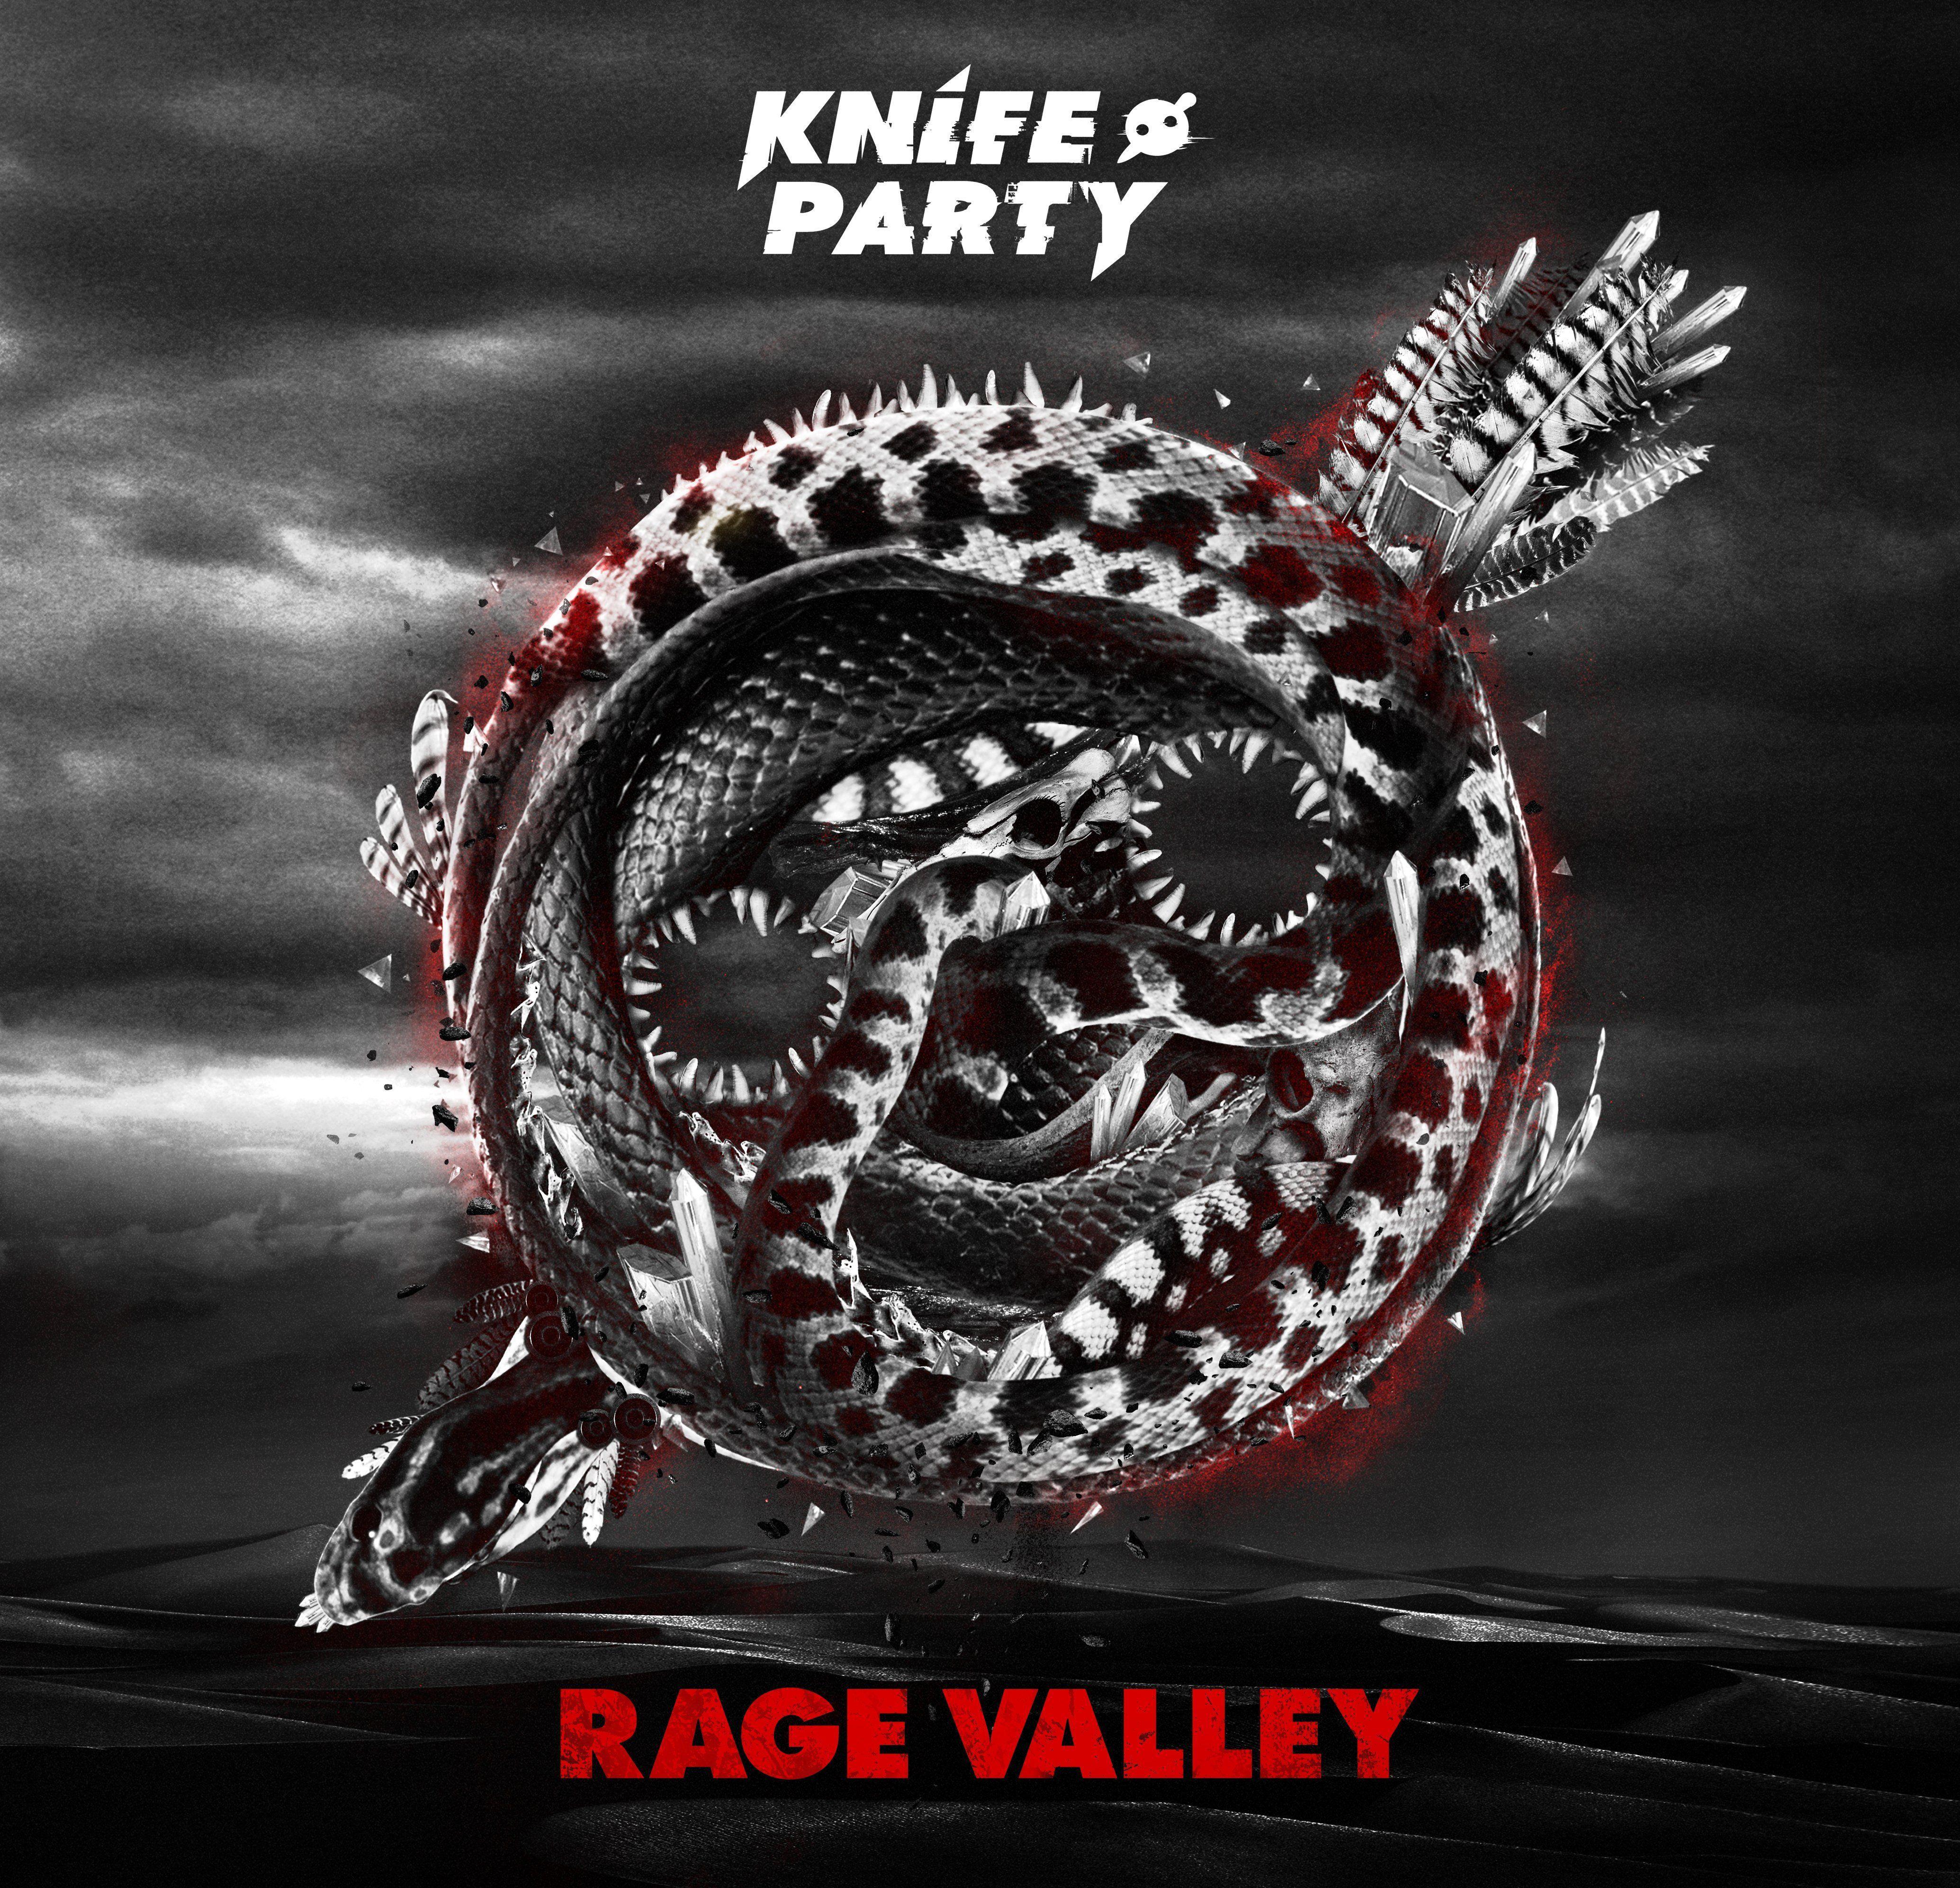 KNIFE PARTY electro house dub dubstep drum step dance electronic